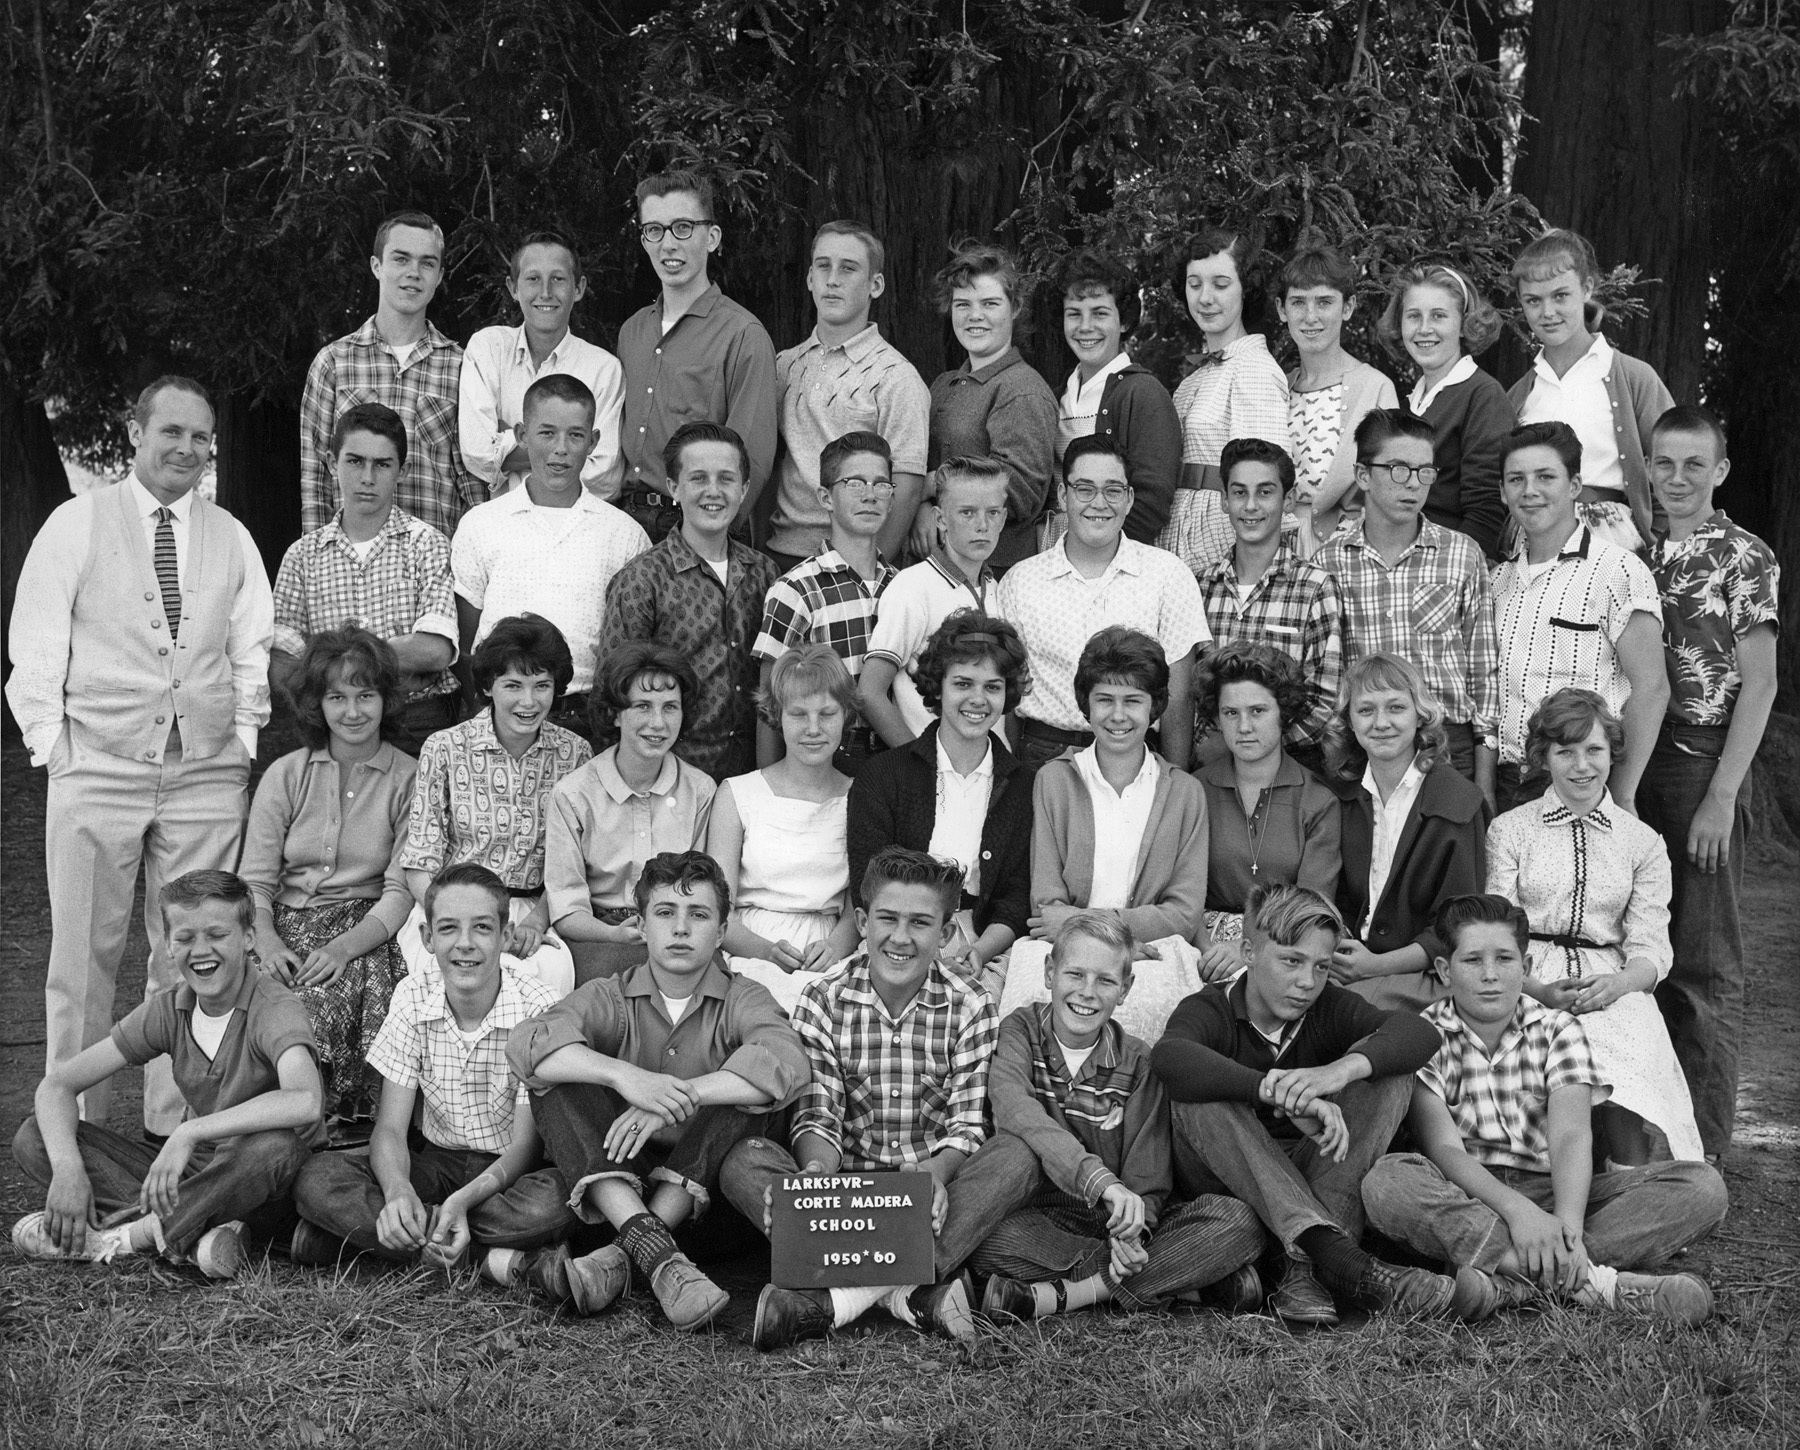 Even though it's 1960, it's obvious that the 60s haven't started yet. My eighth grade class photo in Larkspur - or as Dave would say, idyllic Larkspur. I must say, though, that we're looking somewhat less idyllic than when some of us were gathered at the same spot eight years earlier. I'm in the front row, second from left.

So, when did the 60s begin? A case could be made for 1963, 1964 or 1965, but I'm going for 1965. View full size.